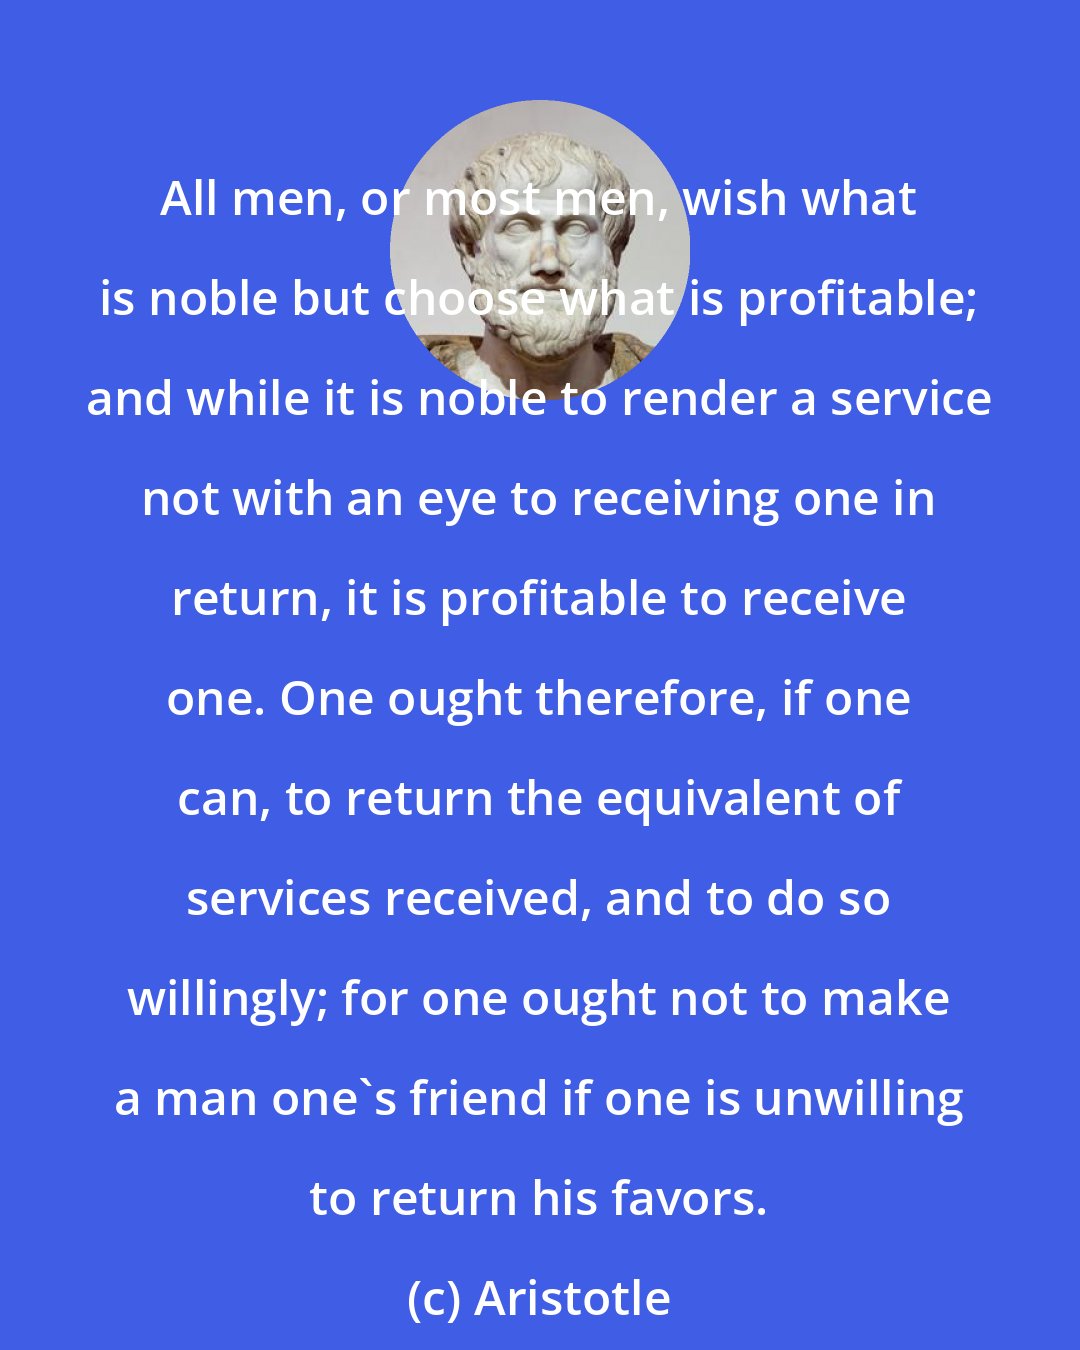 Aristotle: All men, or most men, wish what is noble but choose what is profitable; and while it is noble to render a service not with an eye to receiving one in return, it is profitable to receive one. One ought therefore, if one can, to return the equivalent of services received, and to do so willingly; for one ought not to make a man one's friend if one is unwilling to return his favors.